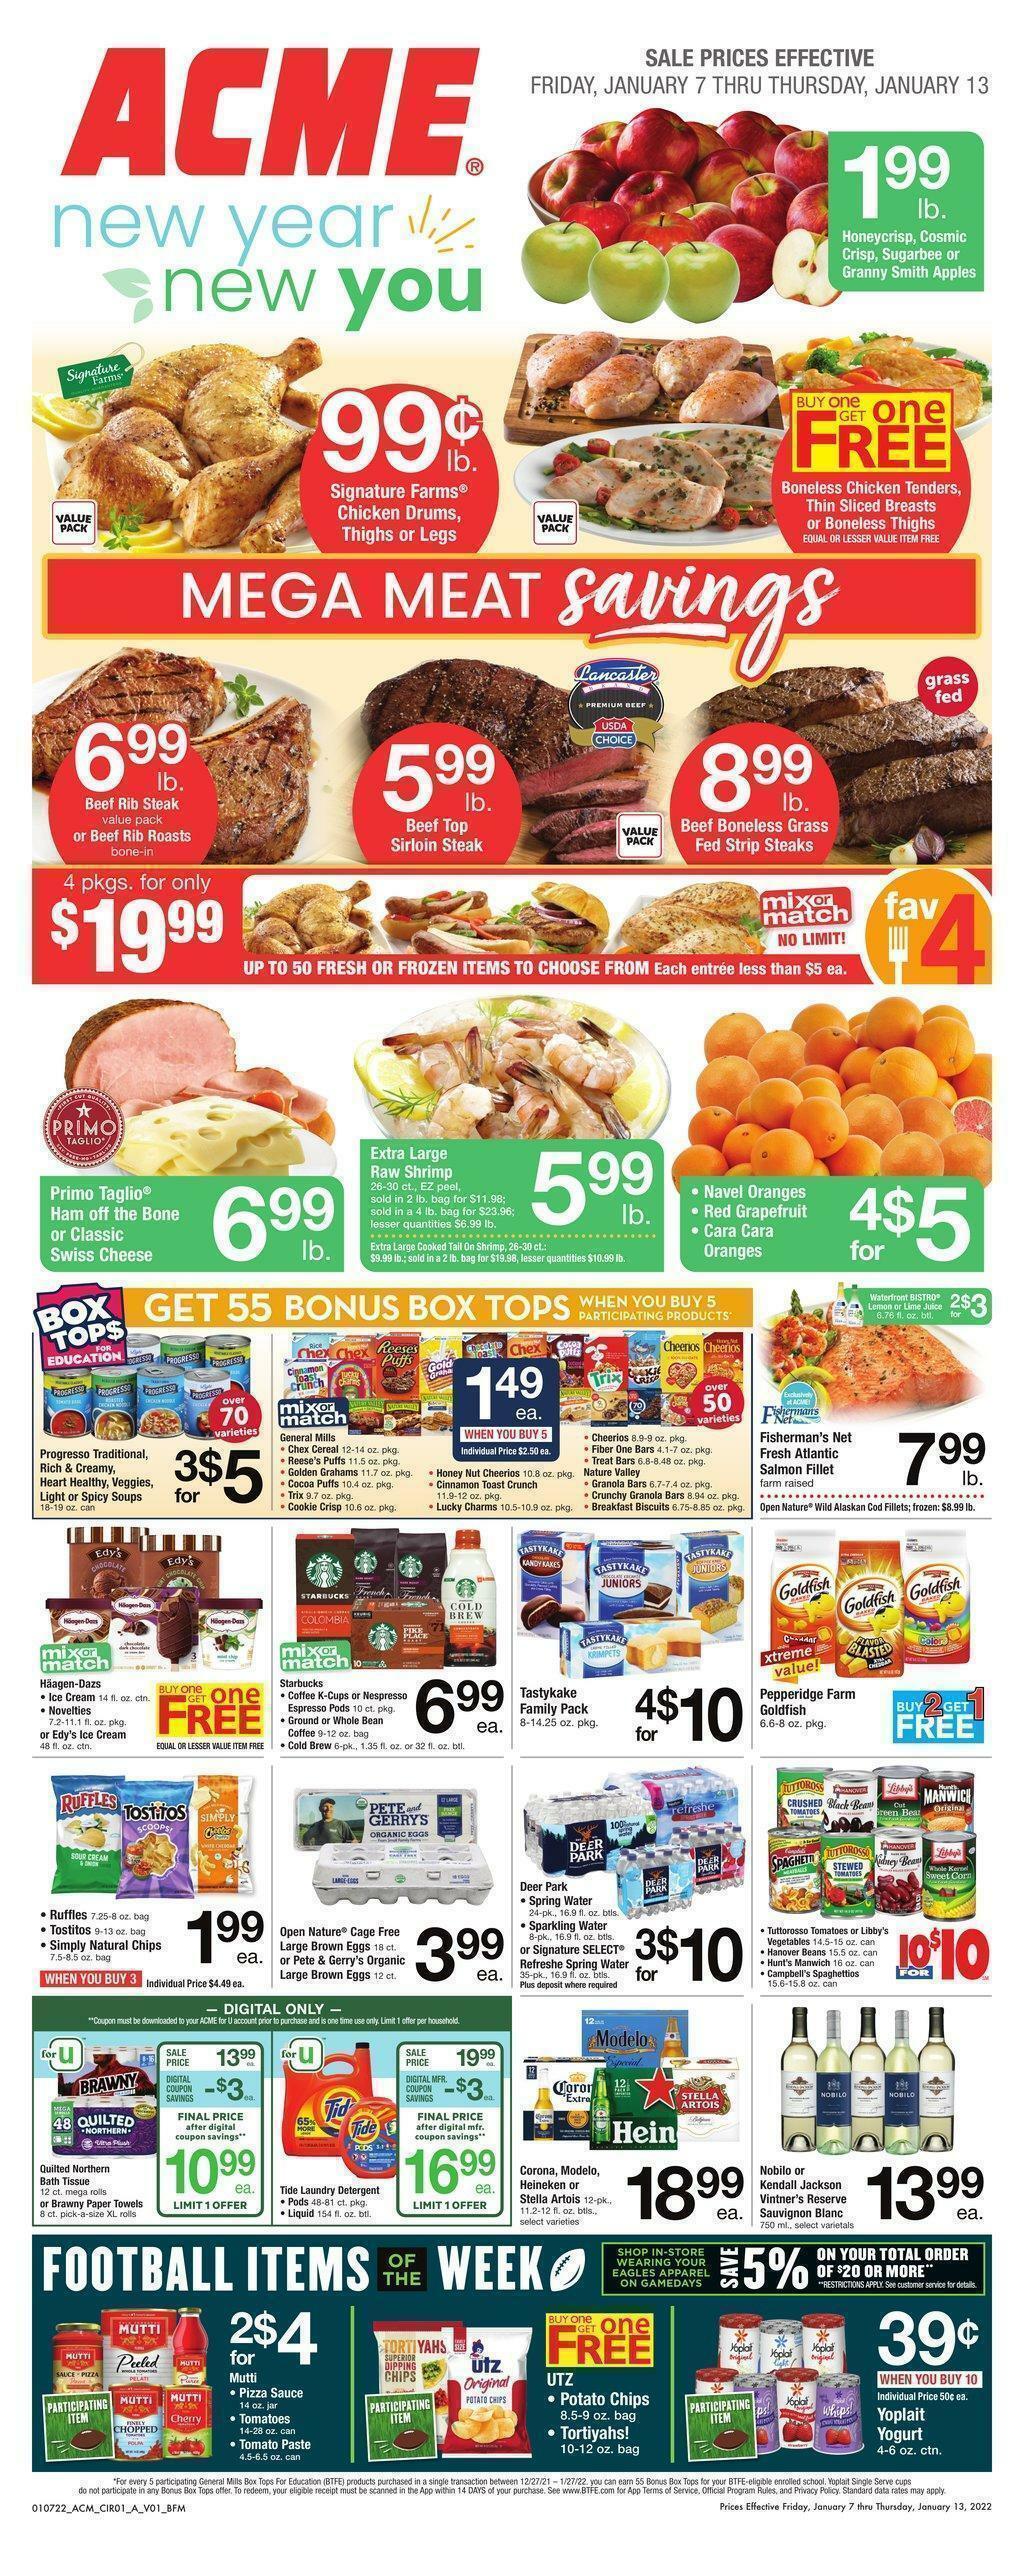 ACME Markets Weekly Ad from January 7